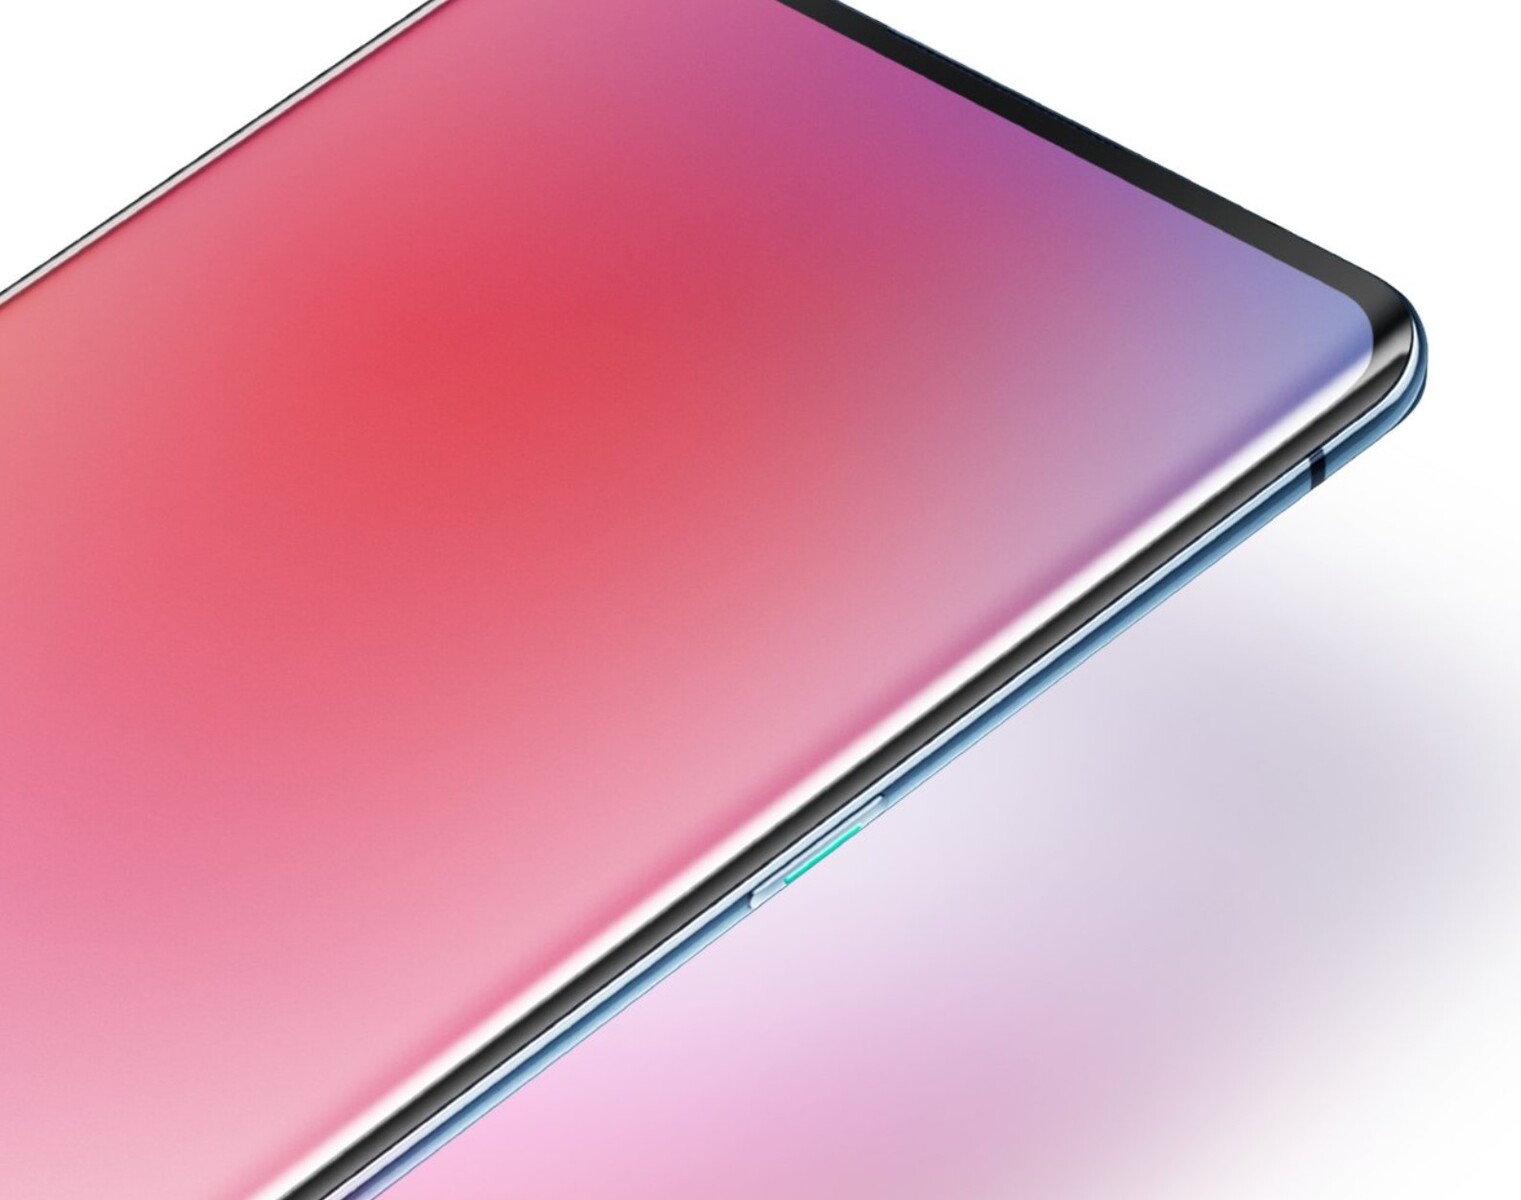 OPPO Reno 3 Pro 5G teased by company executive